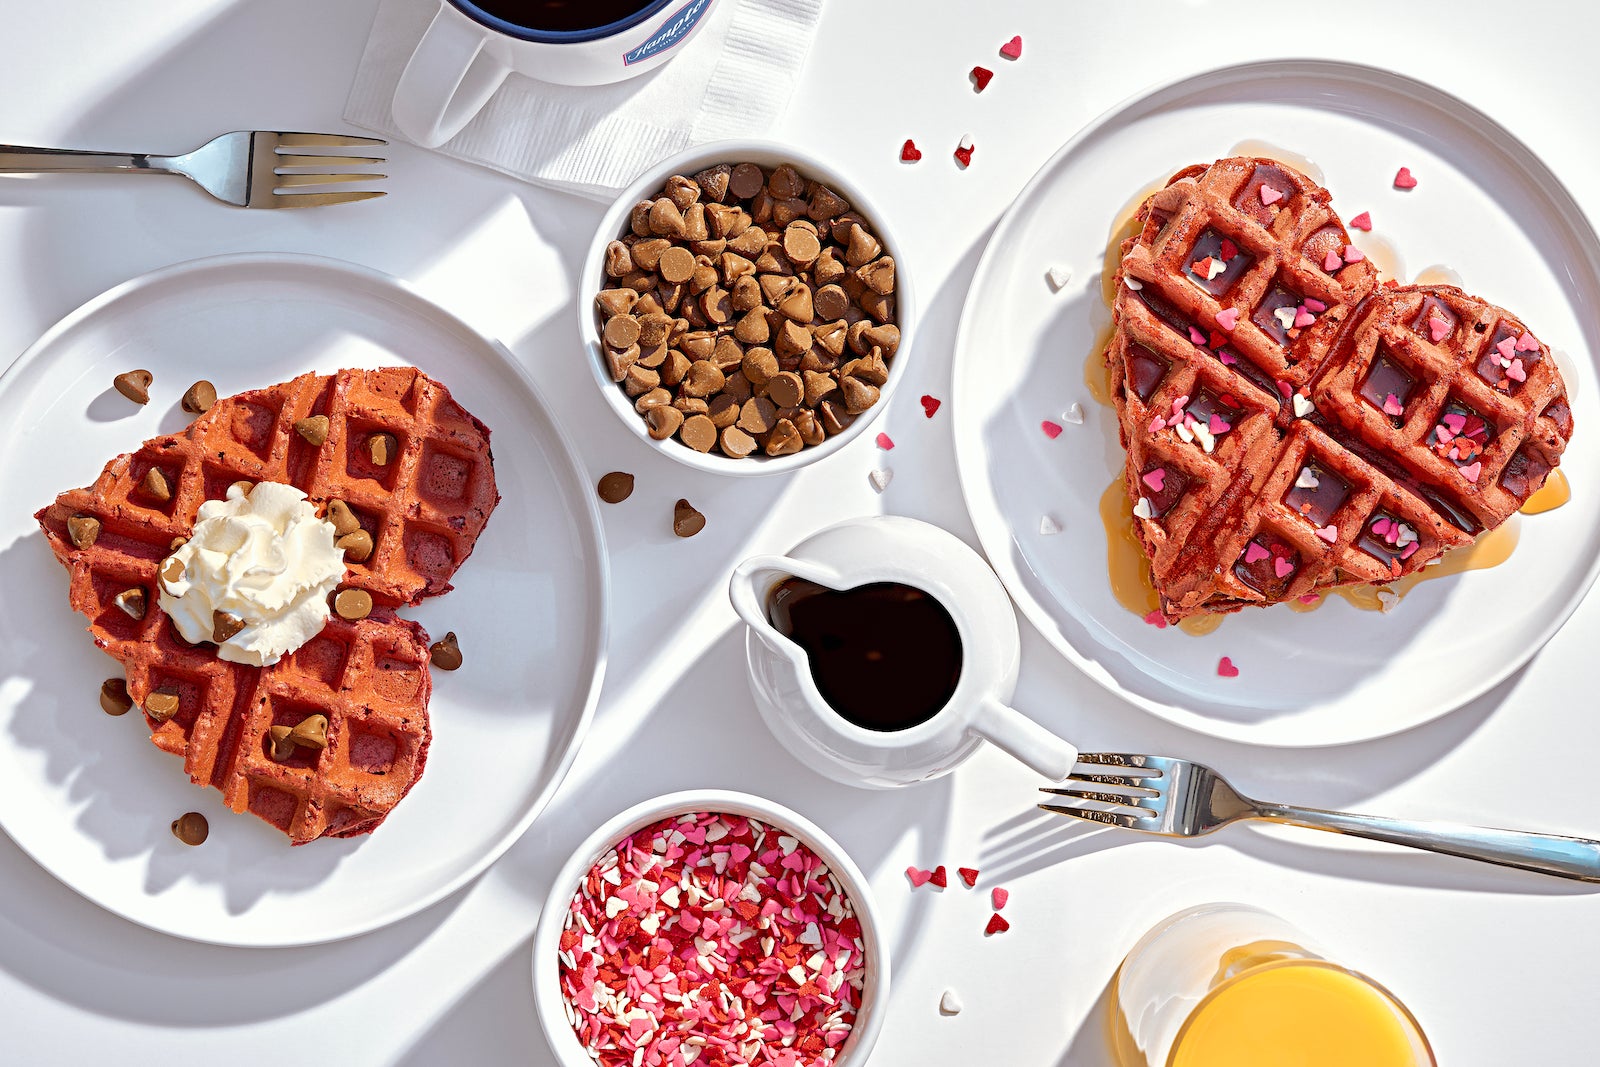 Celebrate Valentine’s Day this month with red velvet waffles at Hampton hotels